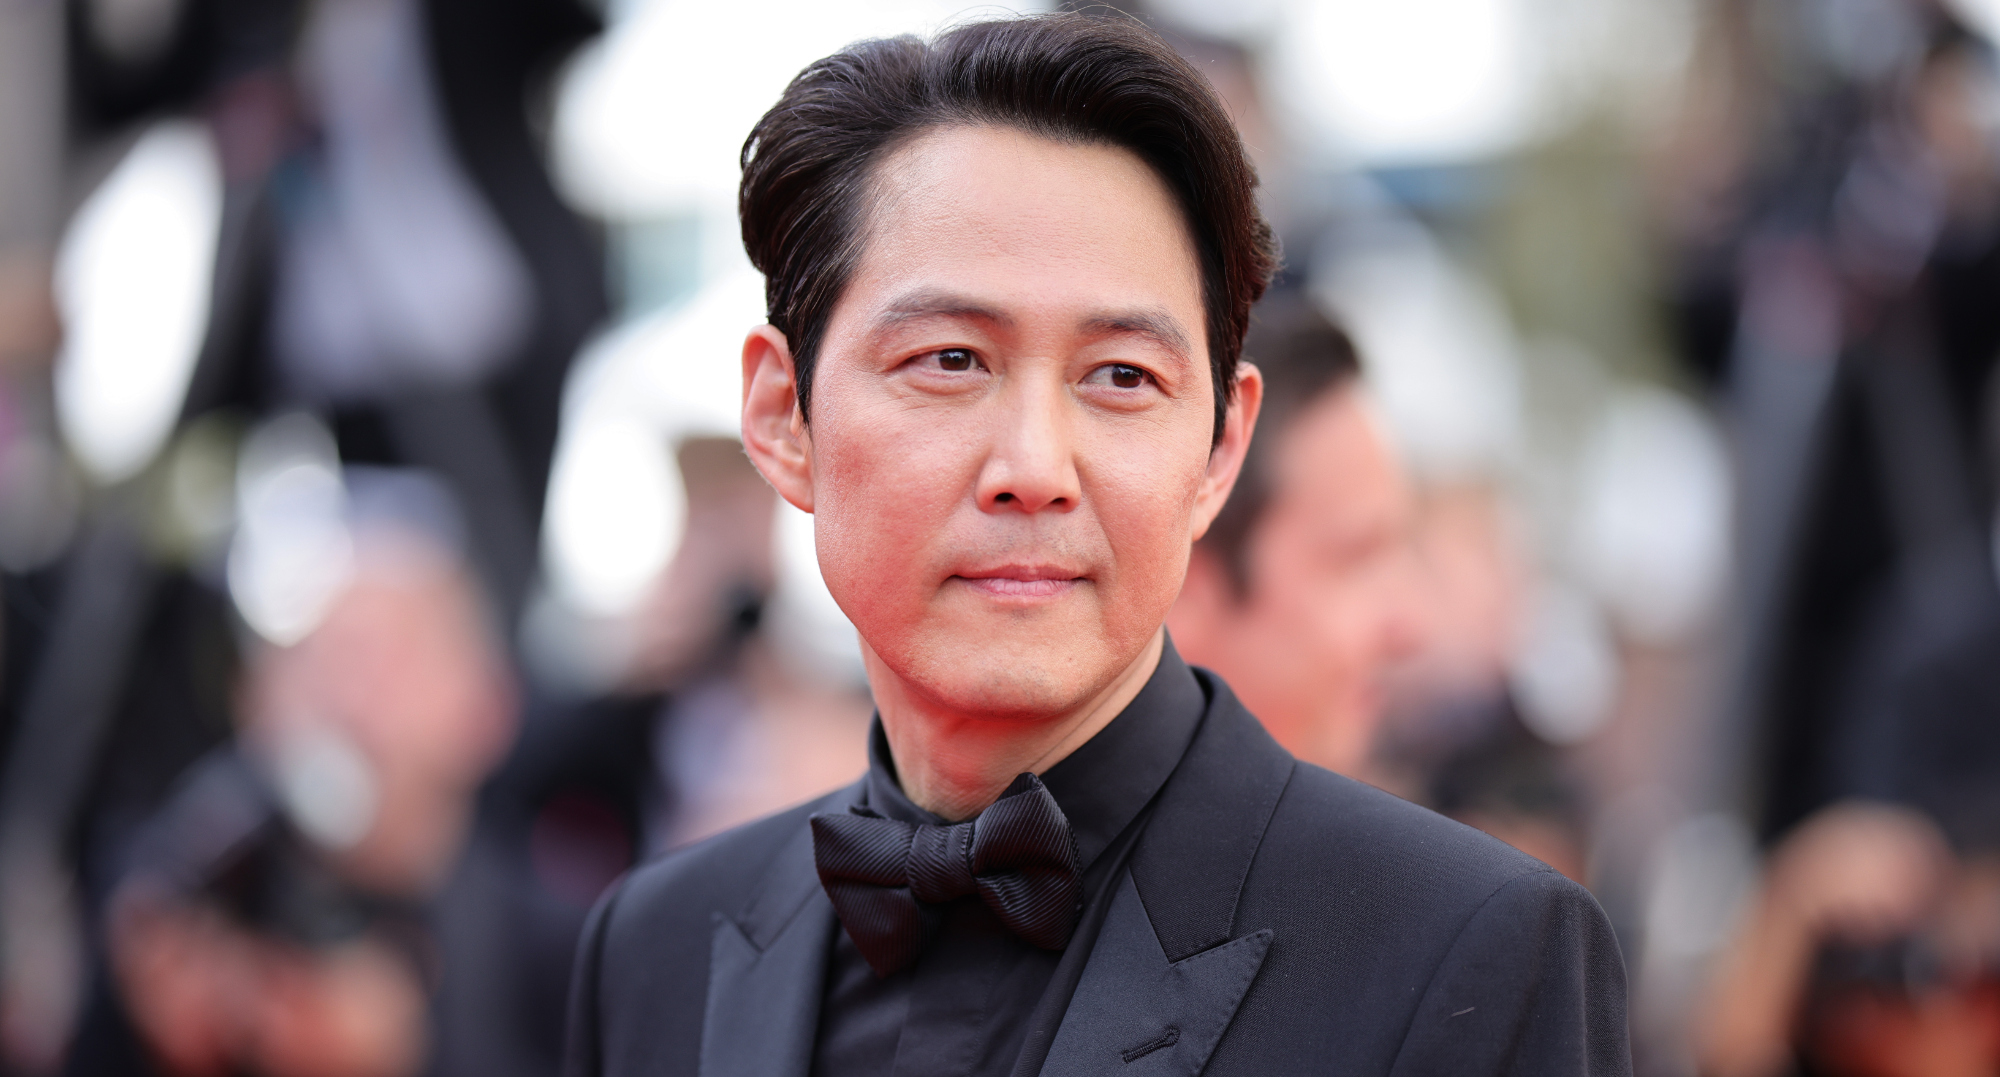 'Squid Game' actor Lee Jung-jae cast in 'The Acolyte.'